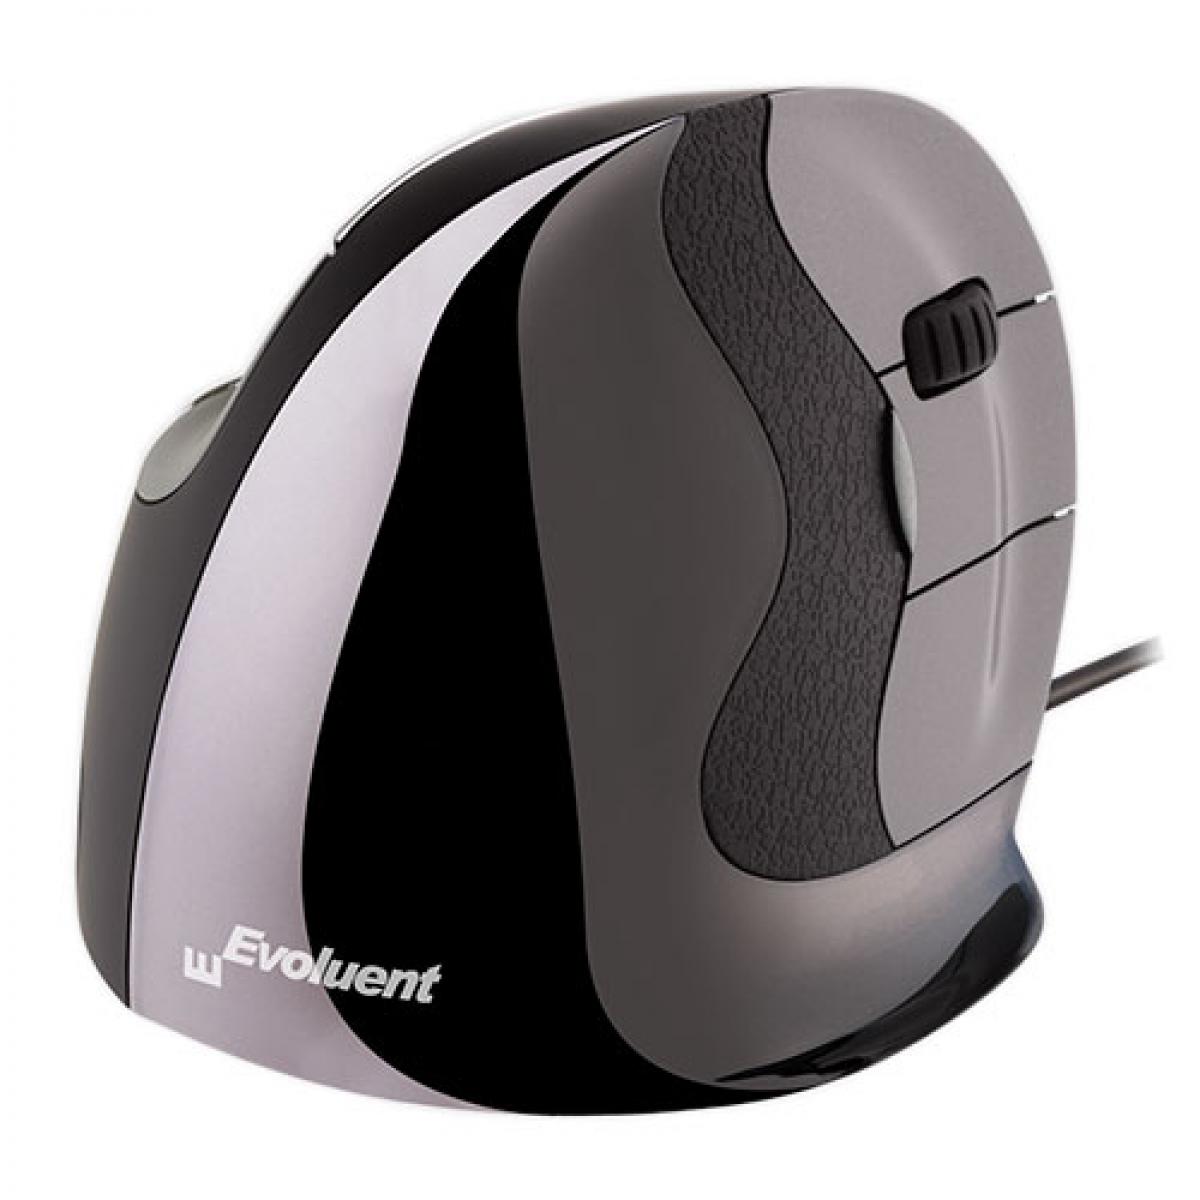 Evoluent Evoluent VerticalMouse D Small